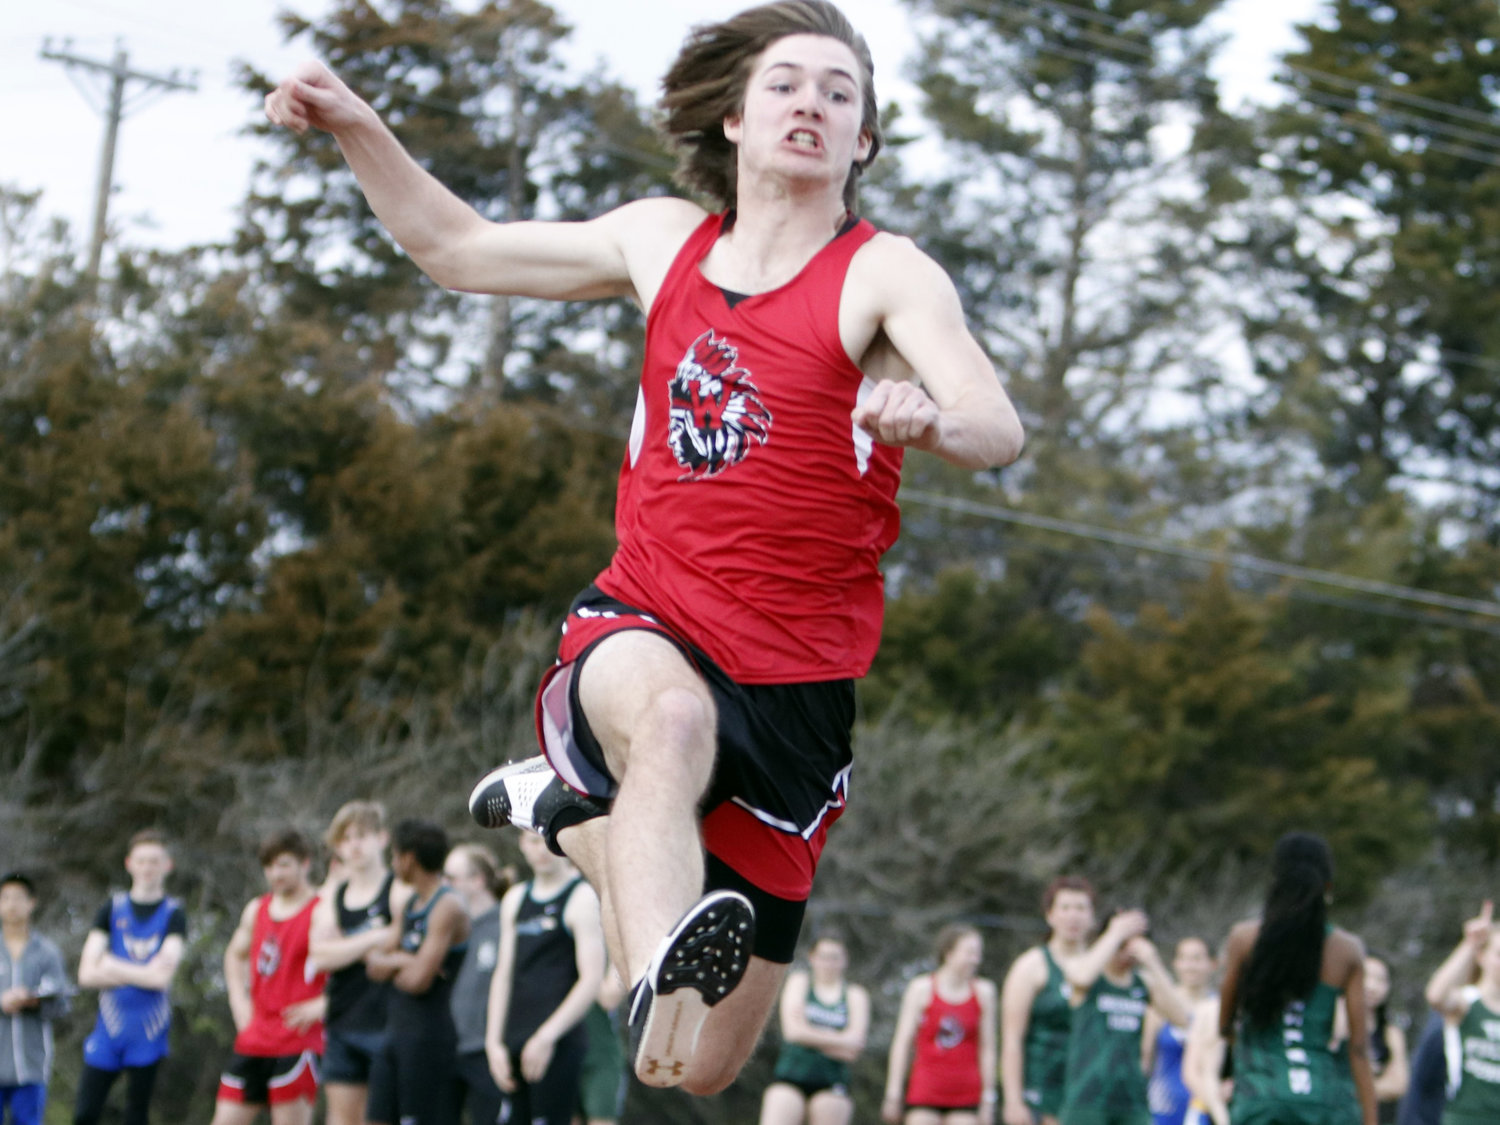 Warrenton's Colton Brosenne leaps in the air during the long jump competition.